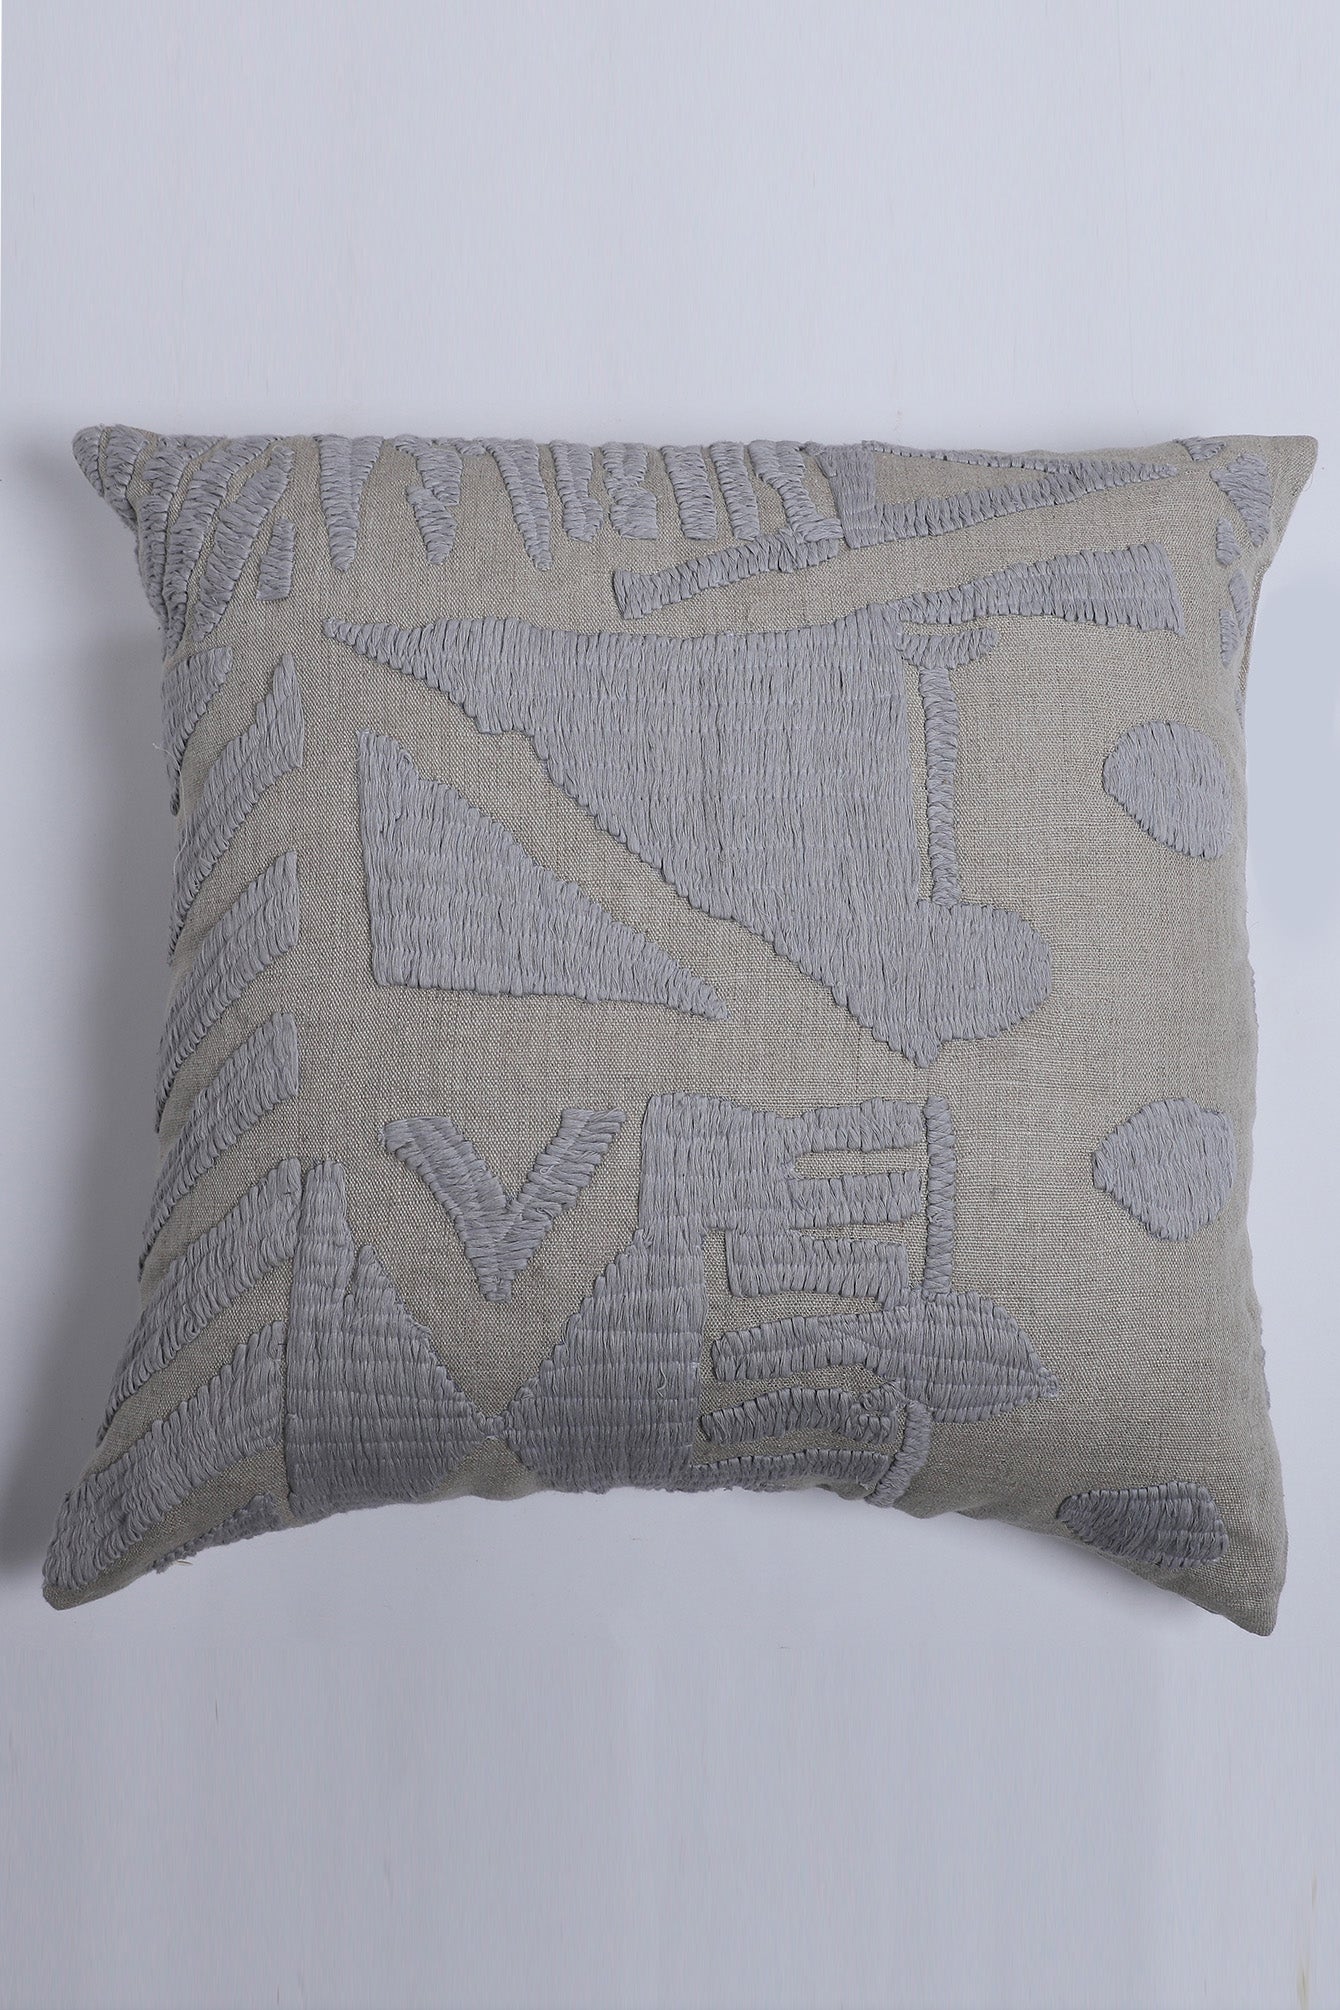 Byala Embroidered Cushion Cover